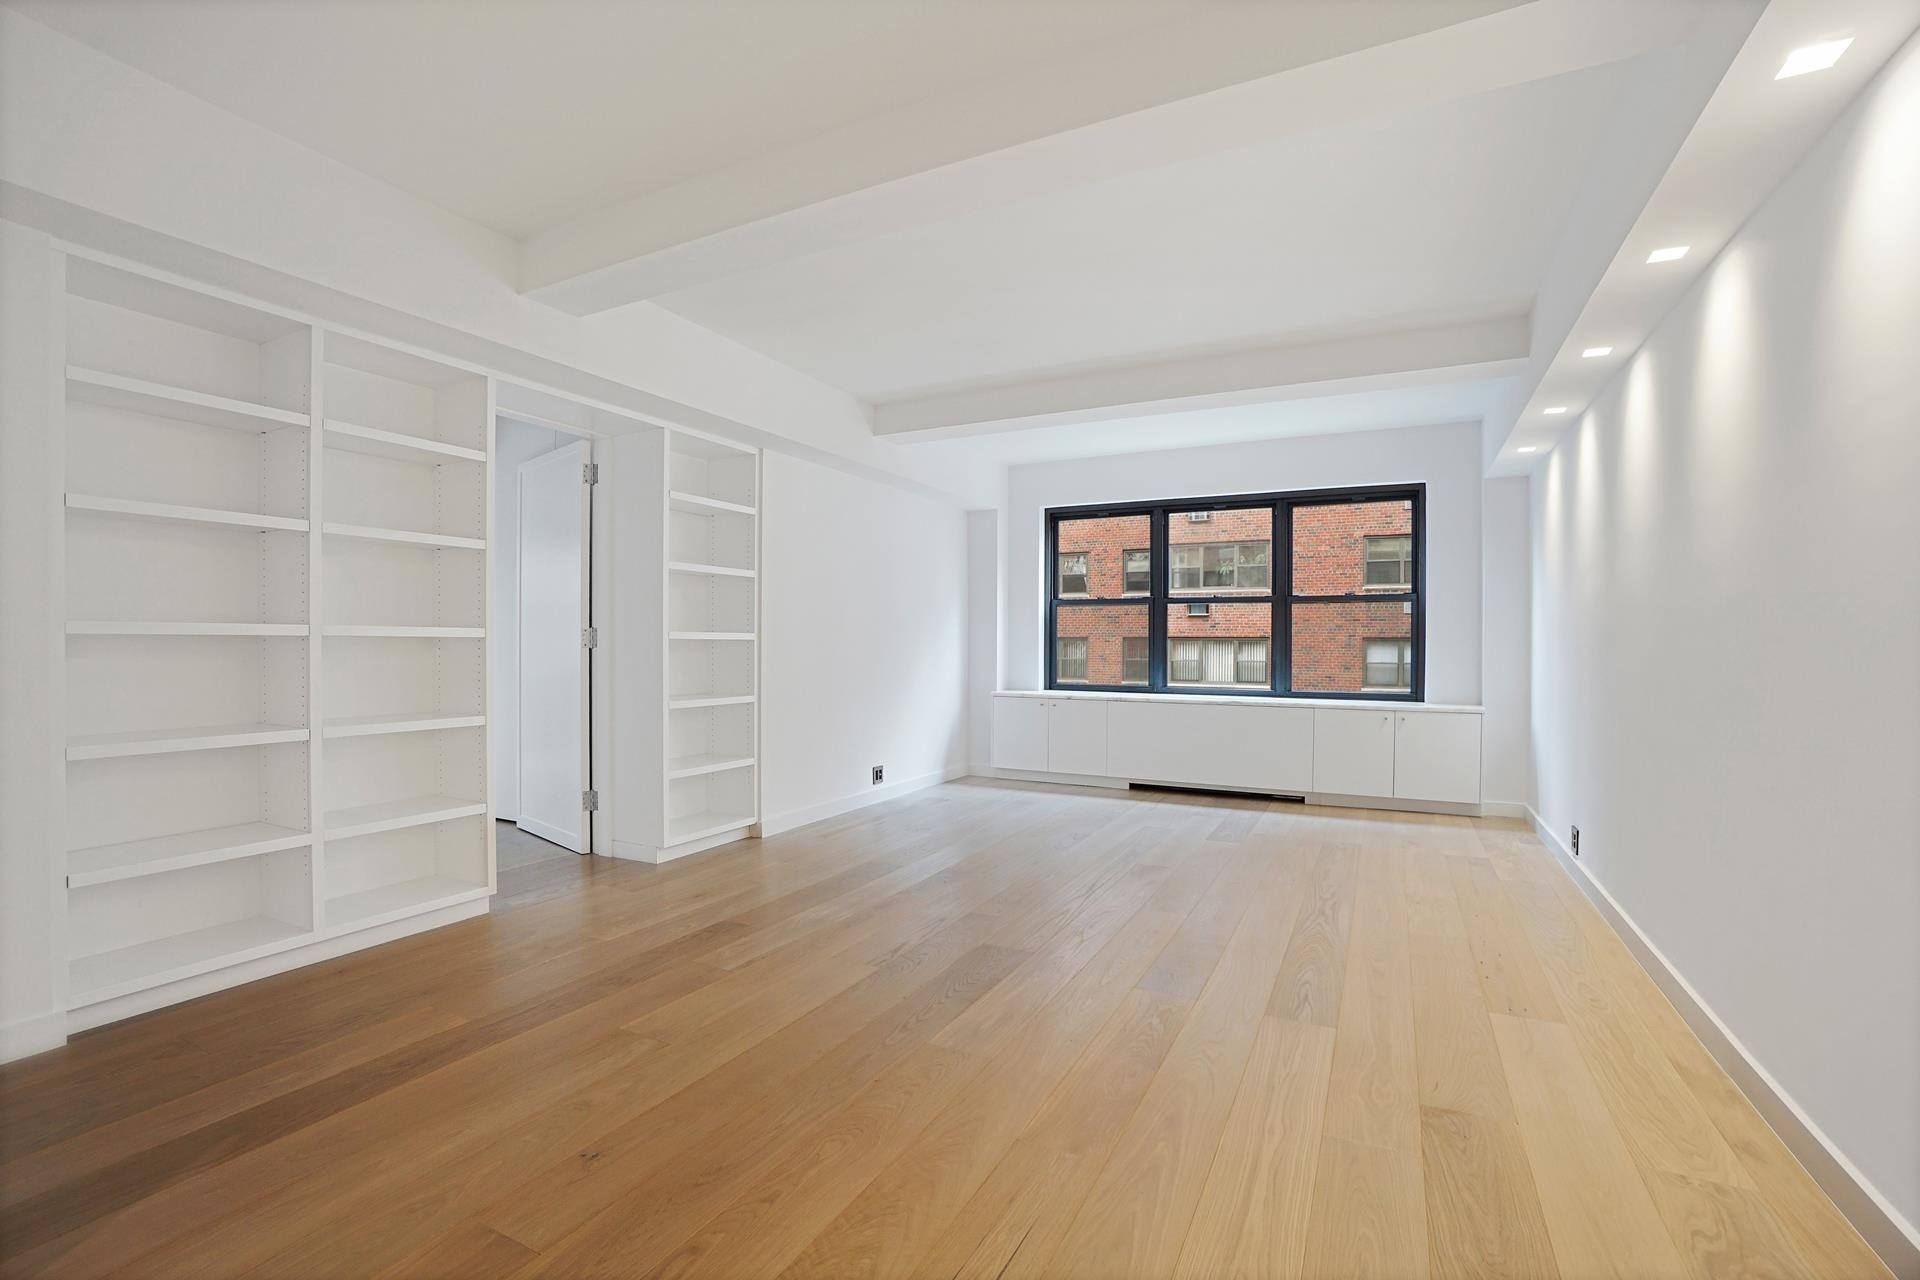 Condominium for Sale at 177 E 77TH ST, 5A Upper East Side, New York, NY 10075